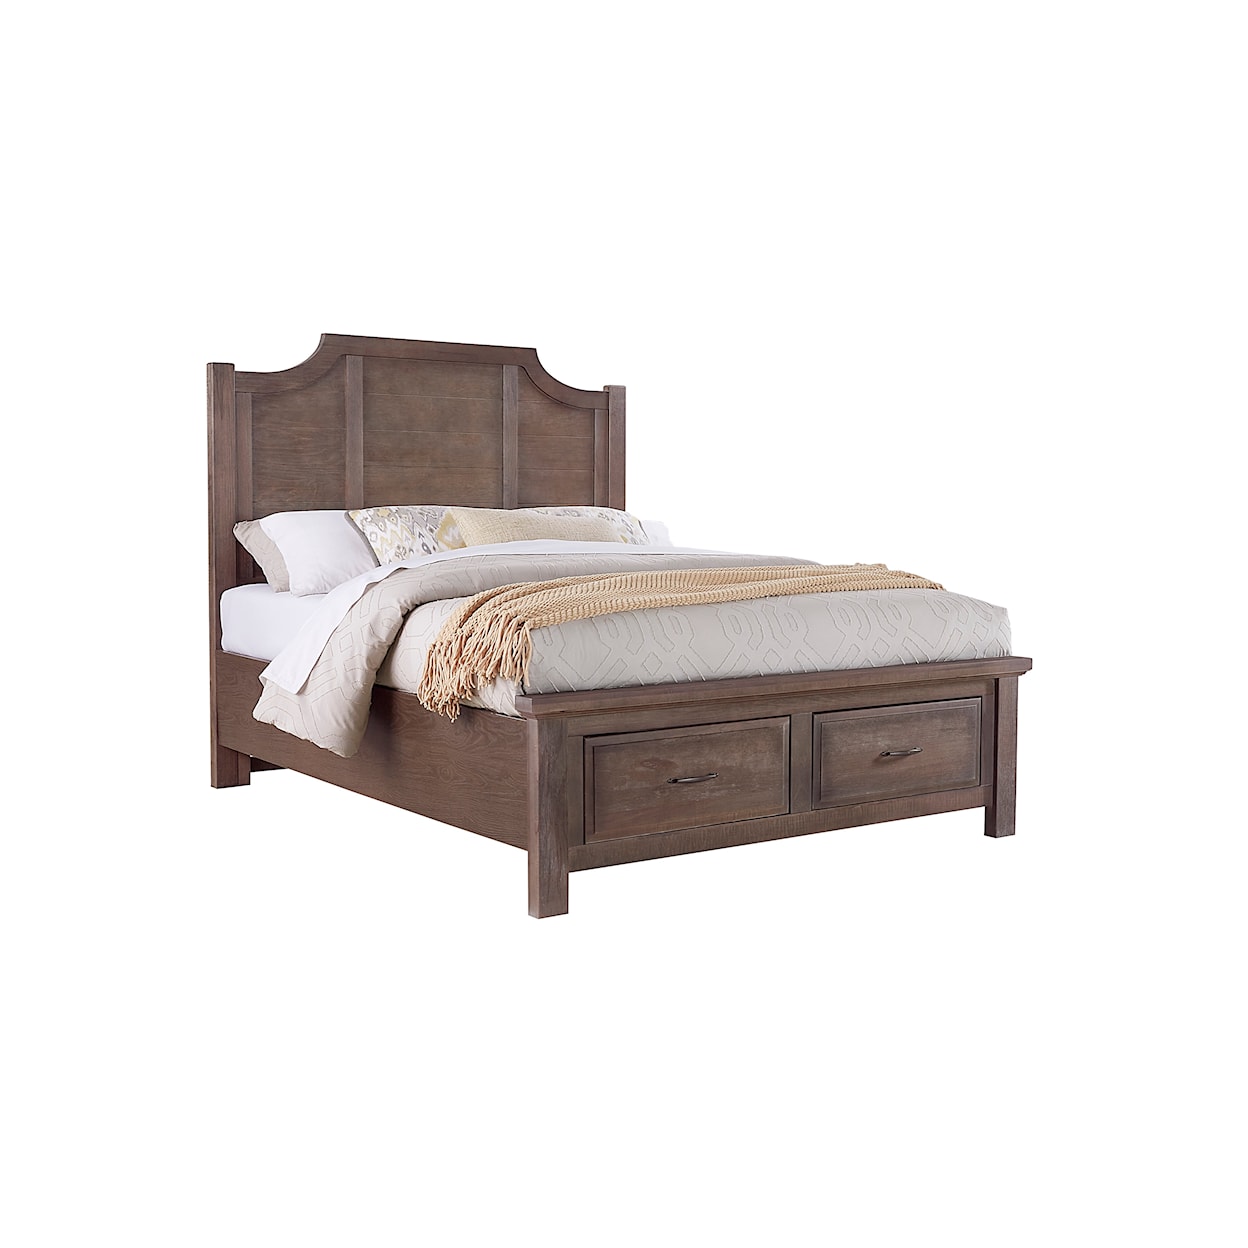 Artisan & Post Maple Road King Scalloped Storage Bed